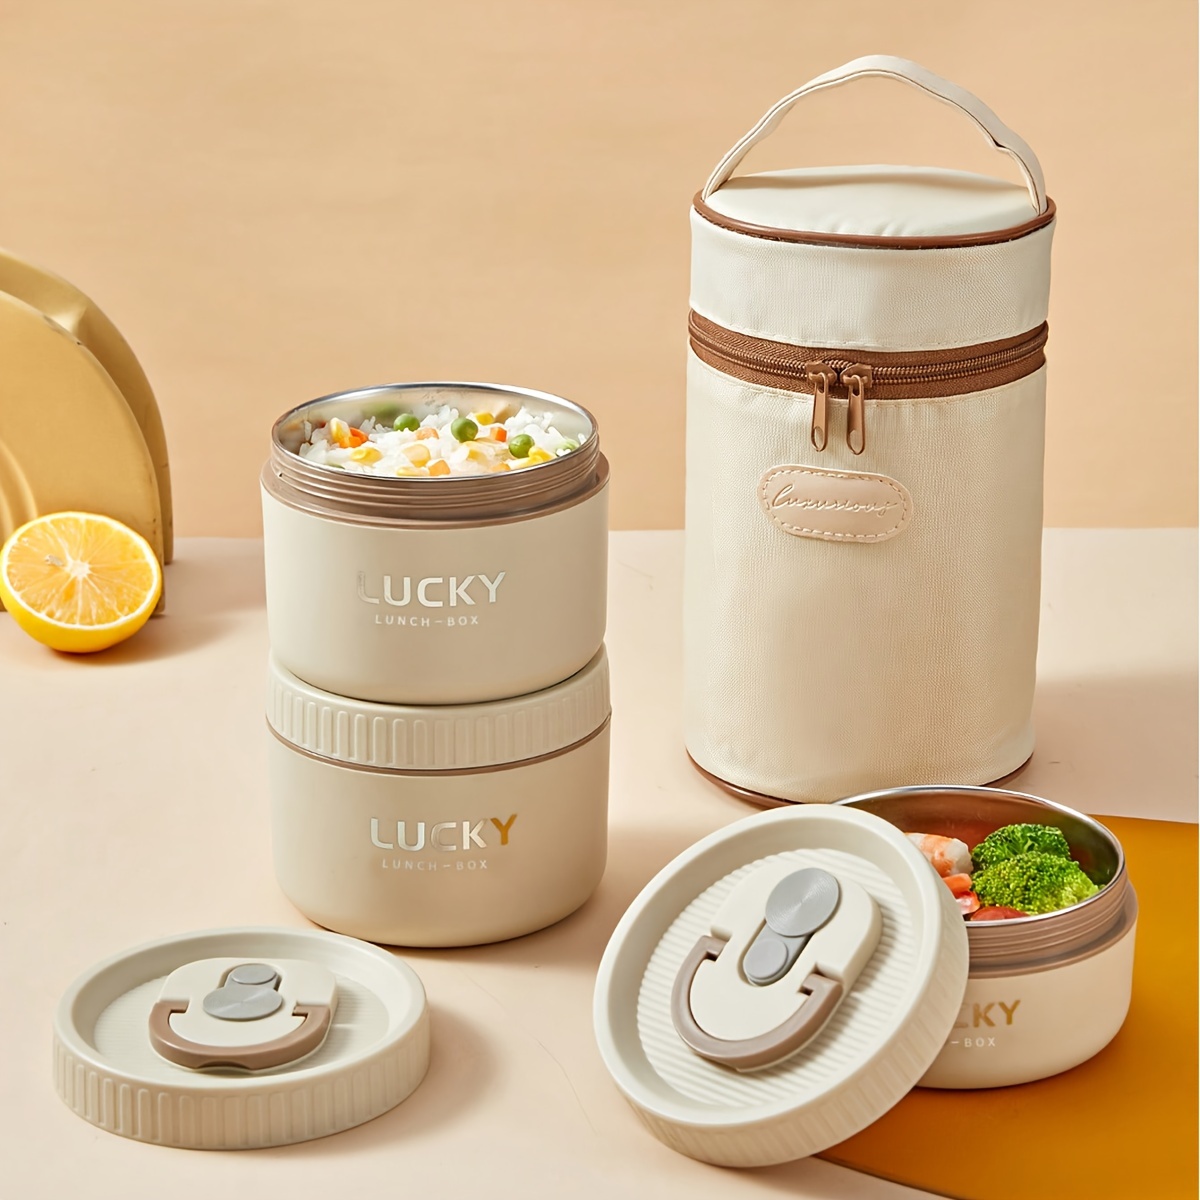 

2/4pcs/set Lunch Box, Portable 304 Stainless Steel Insulated Lunch Box With Thermal Bag And Spoon, Leak Proof And Reusable Food Storage Box, Kitchen Organizers And Storage, Kitchen Accessories